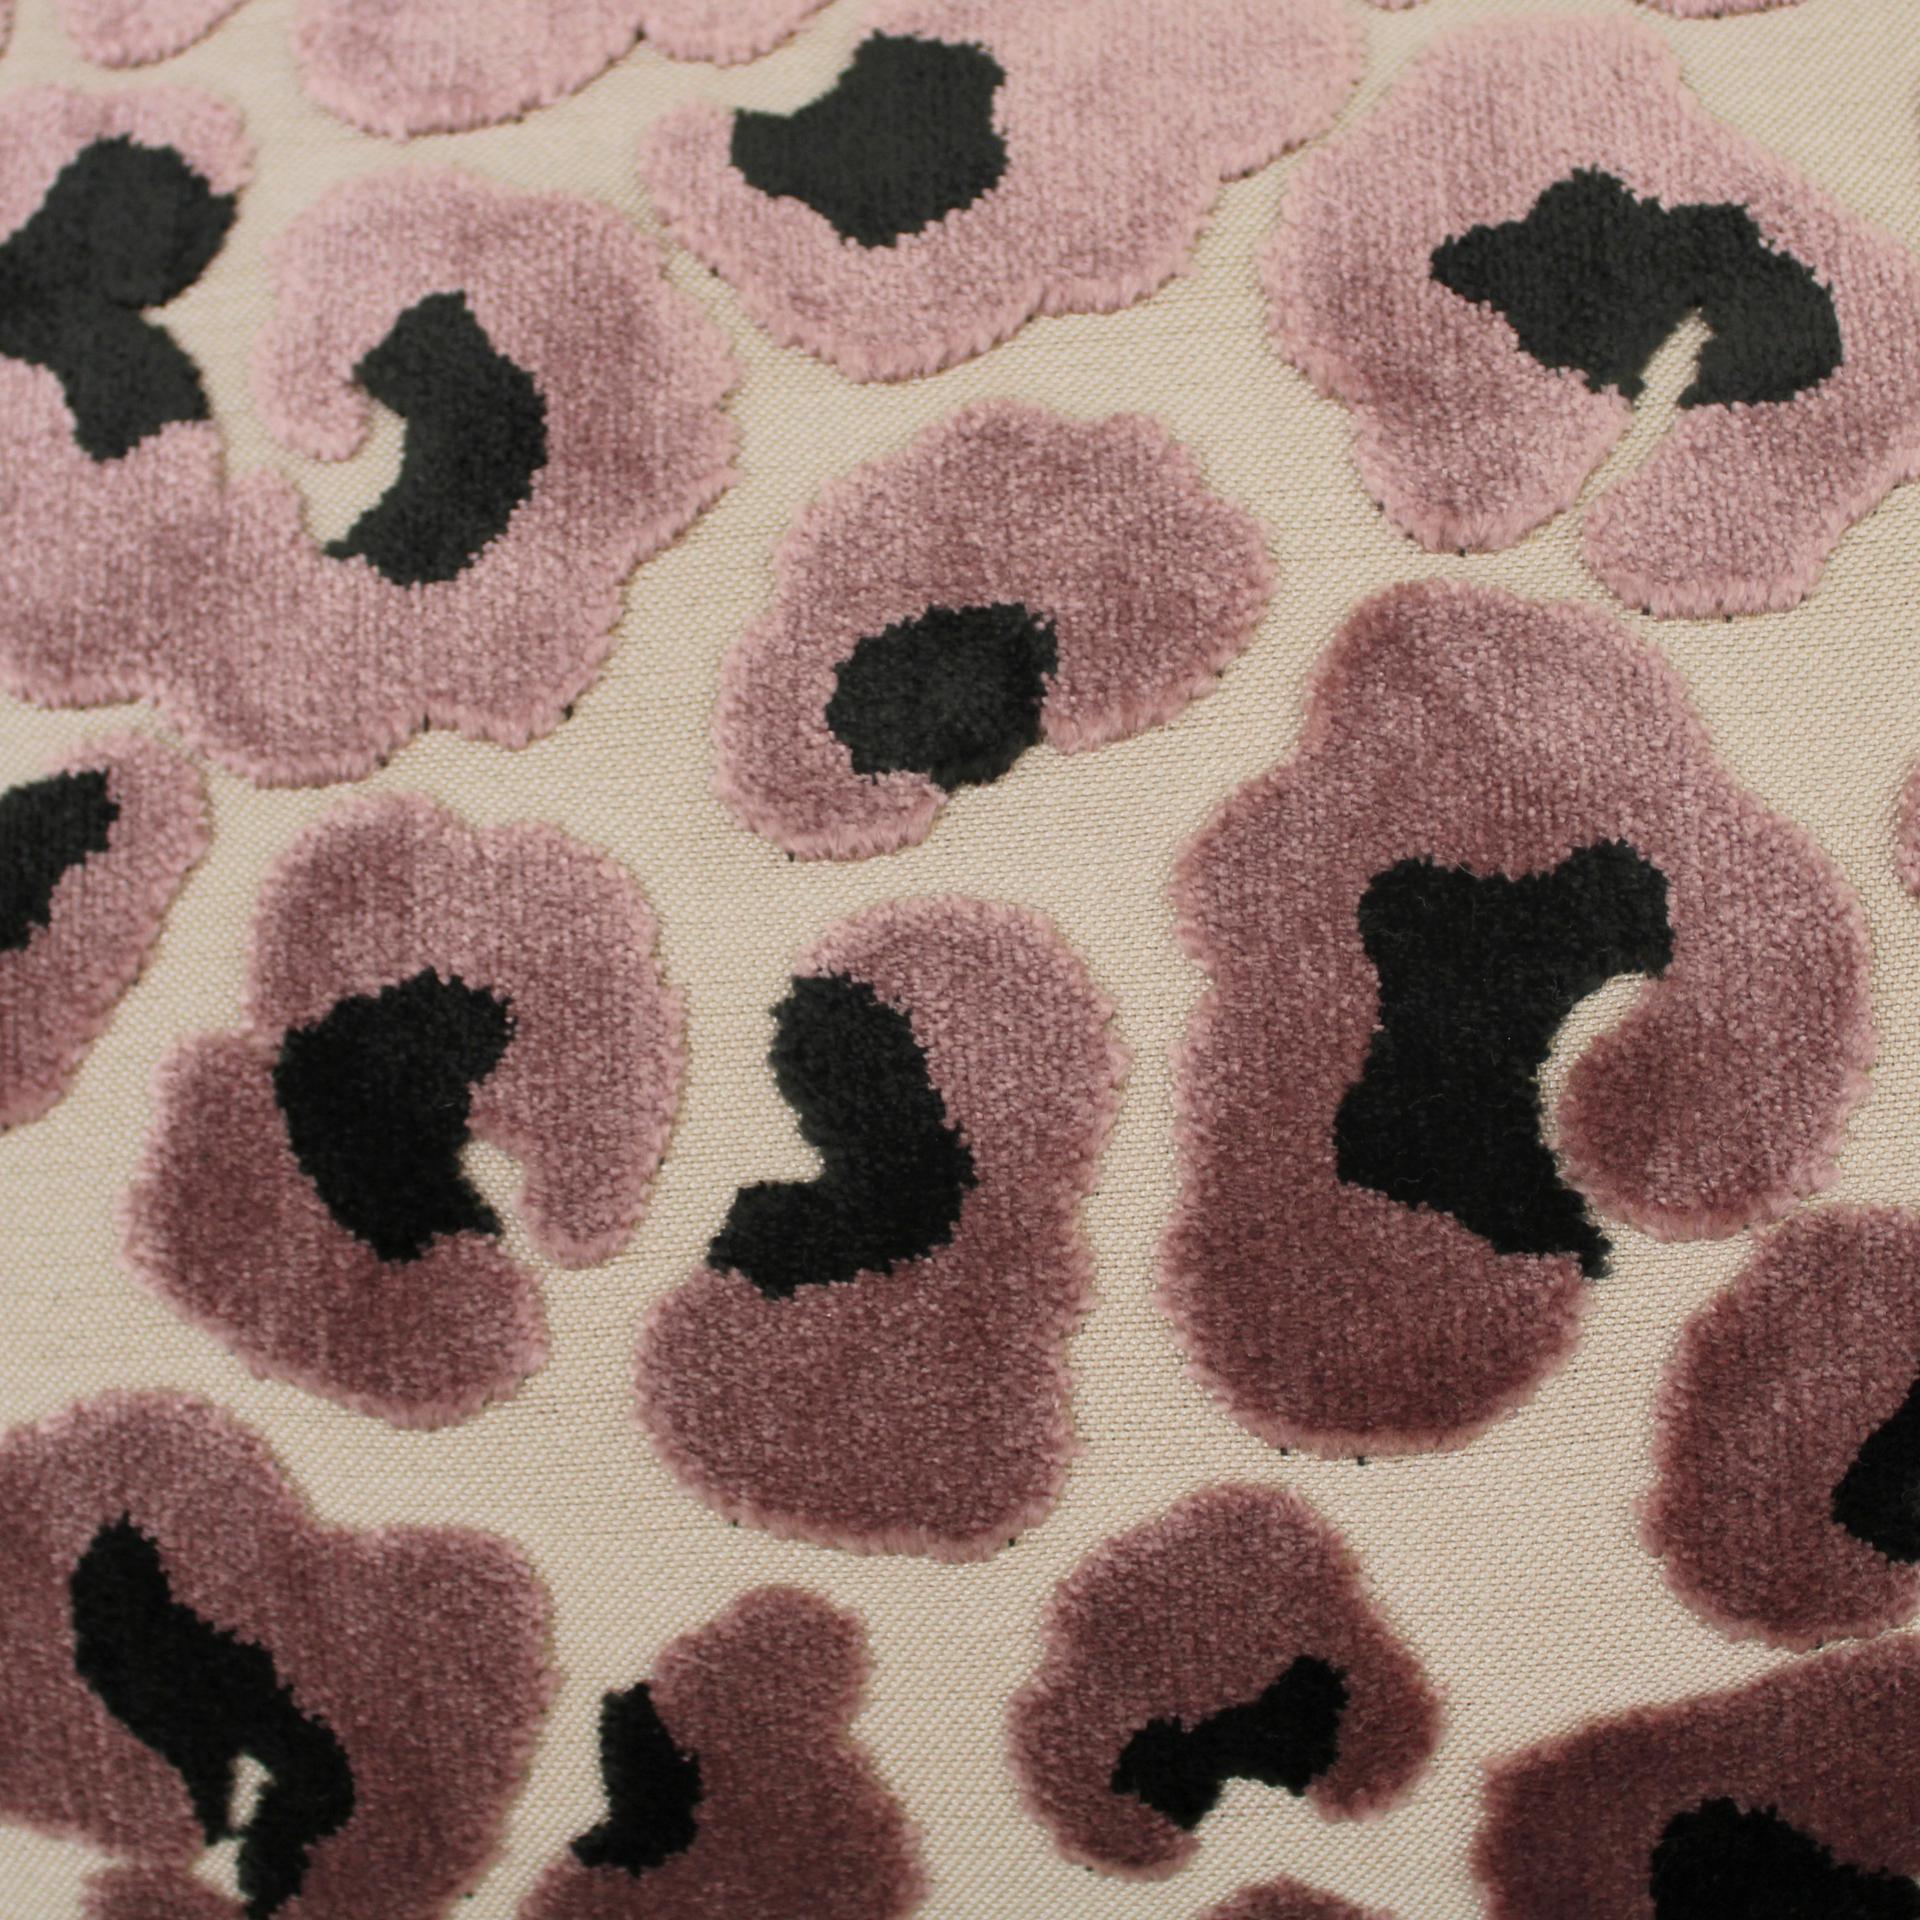 European Leopard Print Velvet Cushion in Cotton with Double Tinsel Trim and Linen Back For Sale